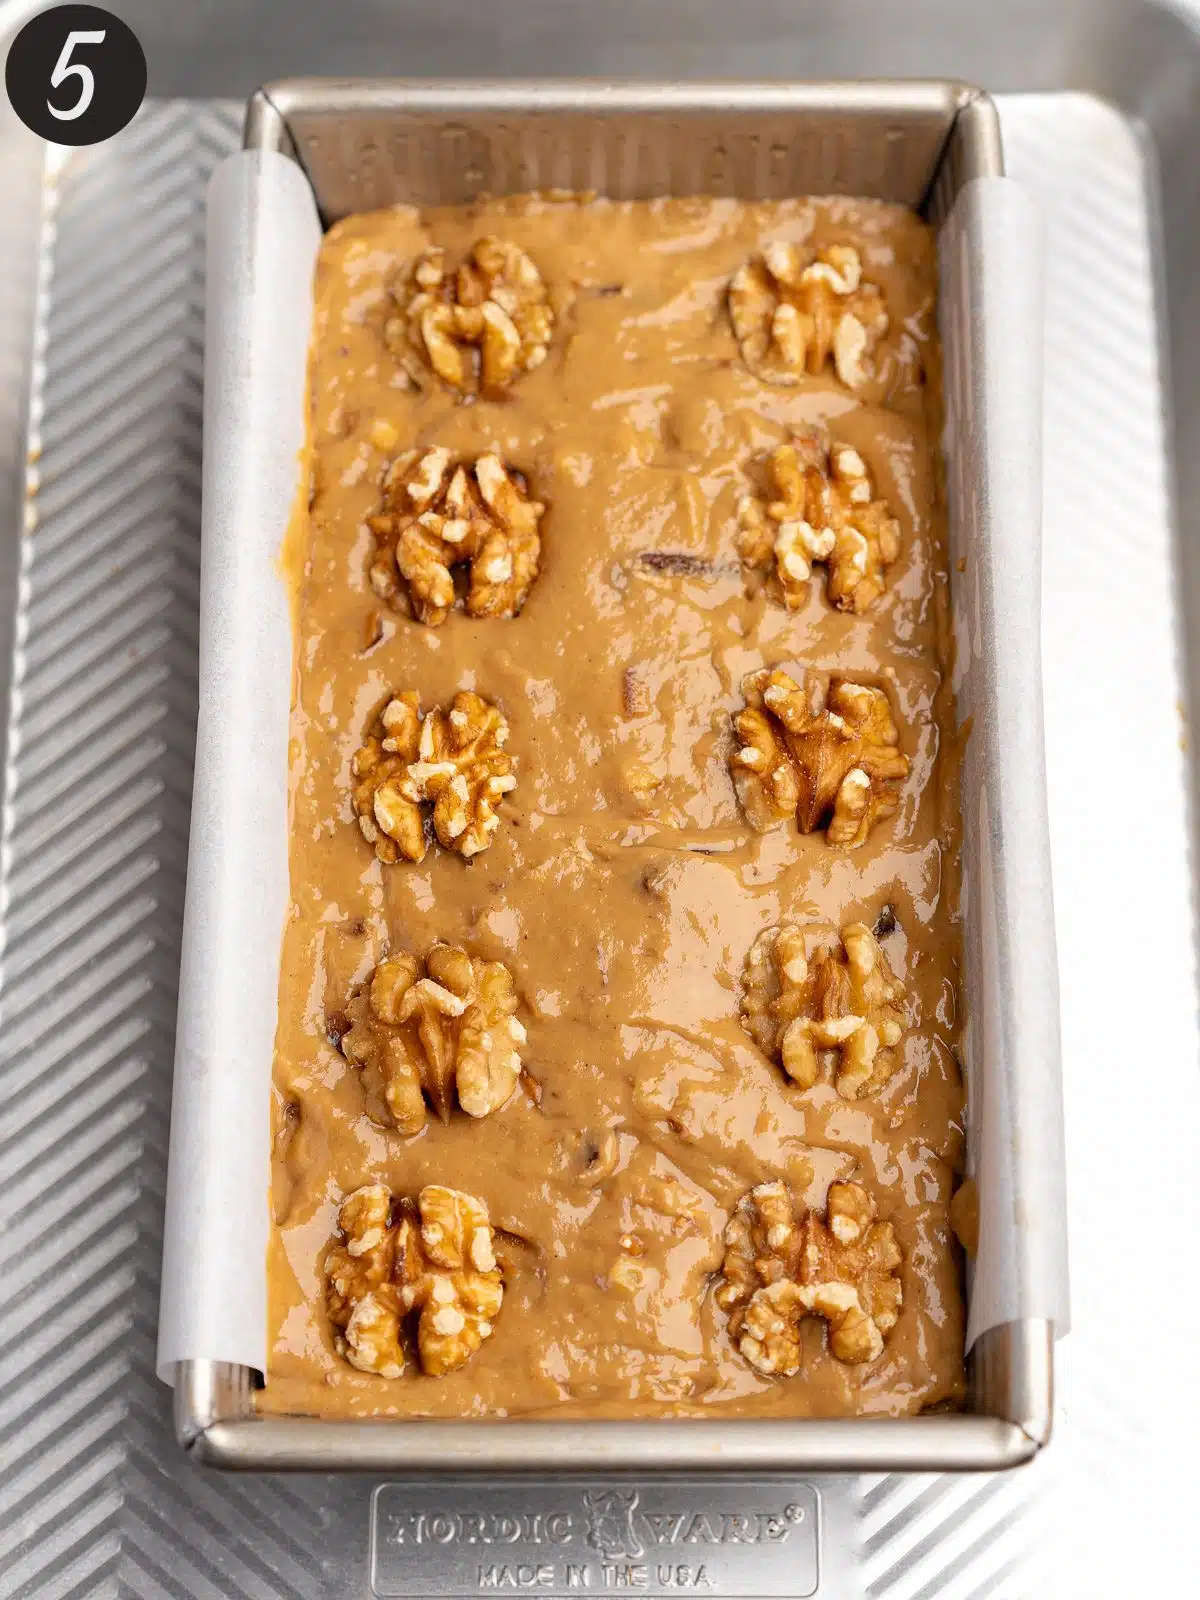 date cake studded with walnuts in a loaf pan before baking.